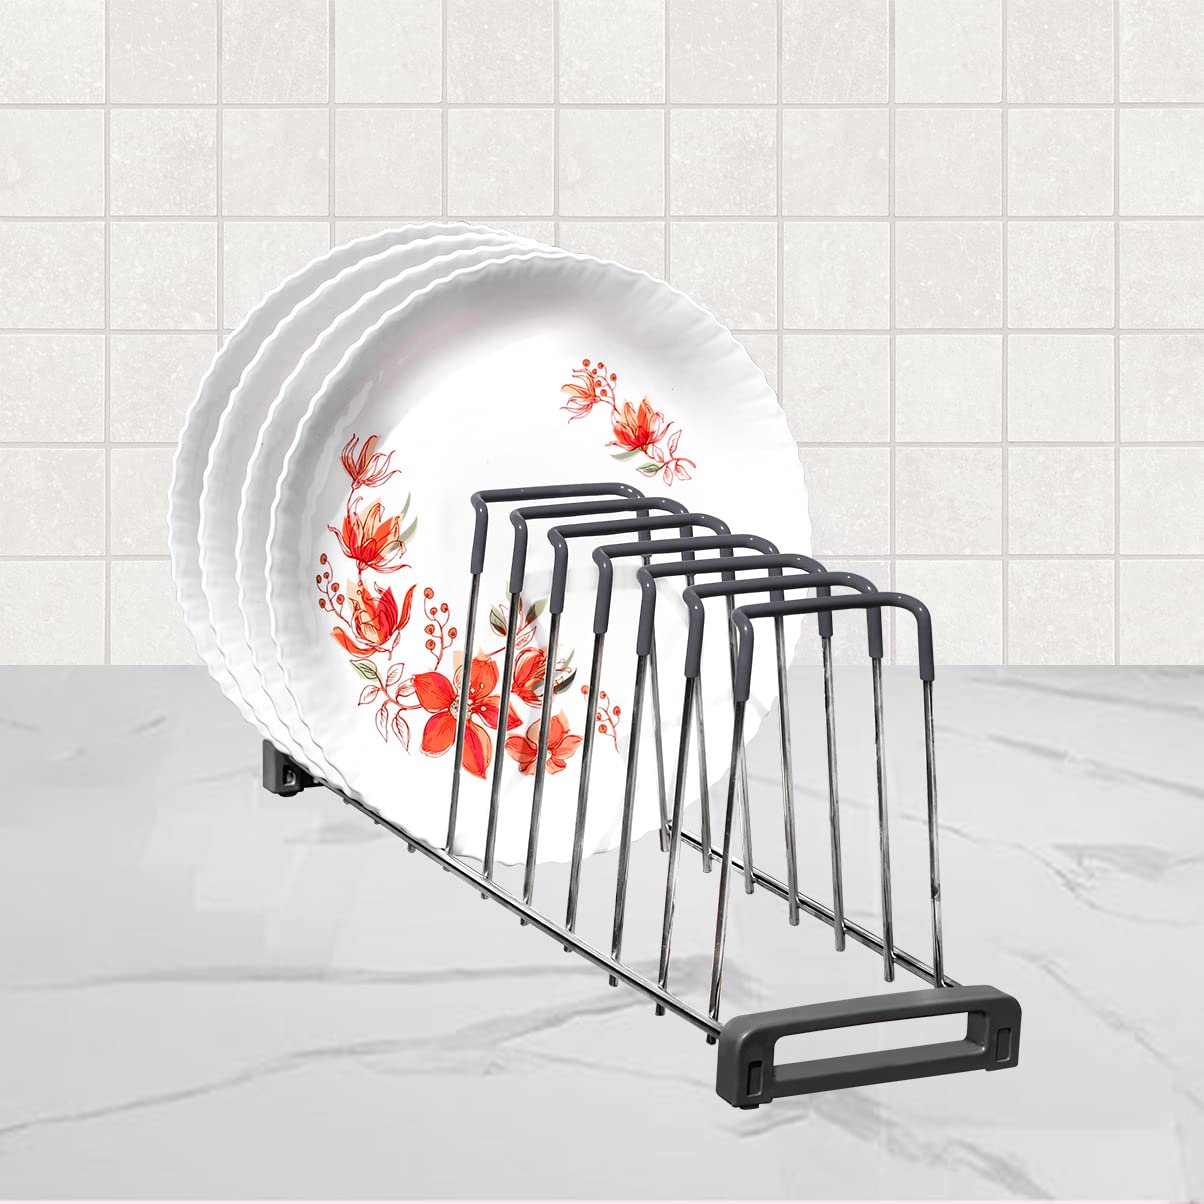 Plantex Deluxe Stainless Steel Dish Rack/Plate Rack/Thali Stand/Dish Stand/Utensil Rack - Chrome